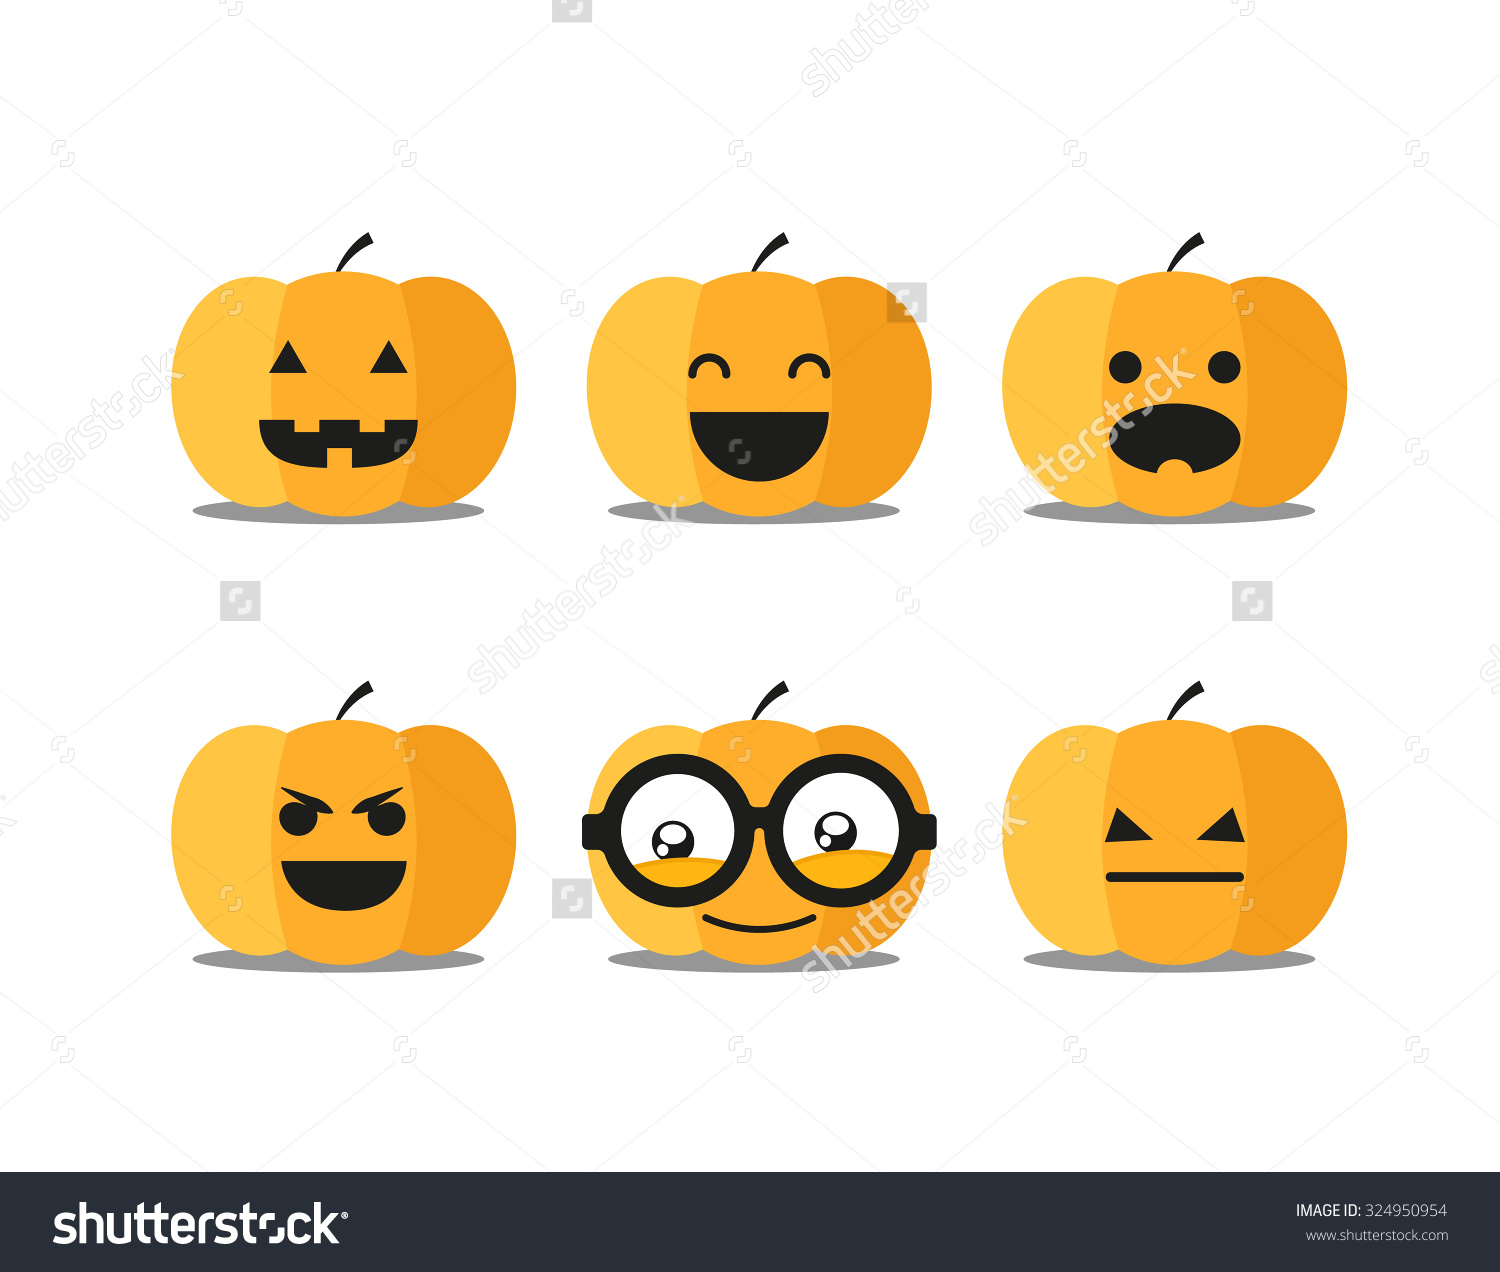 Different helloween pumpkin faces clip-art Preview. Save to a lightbox